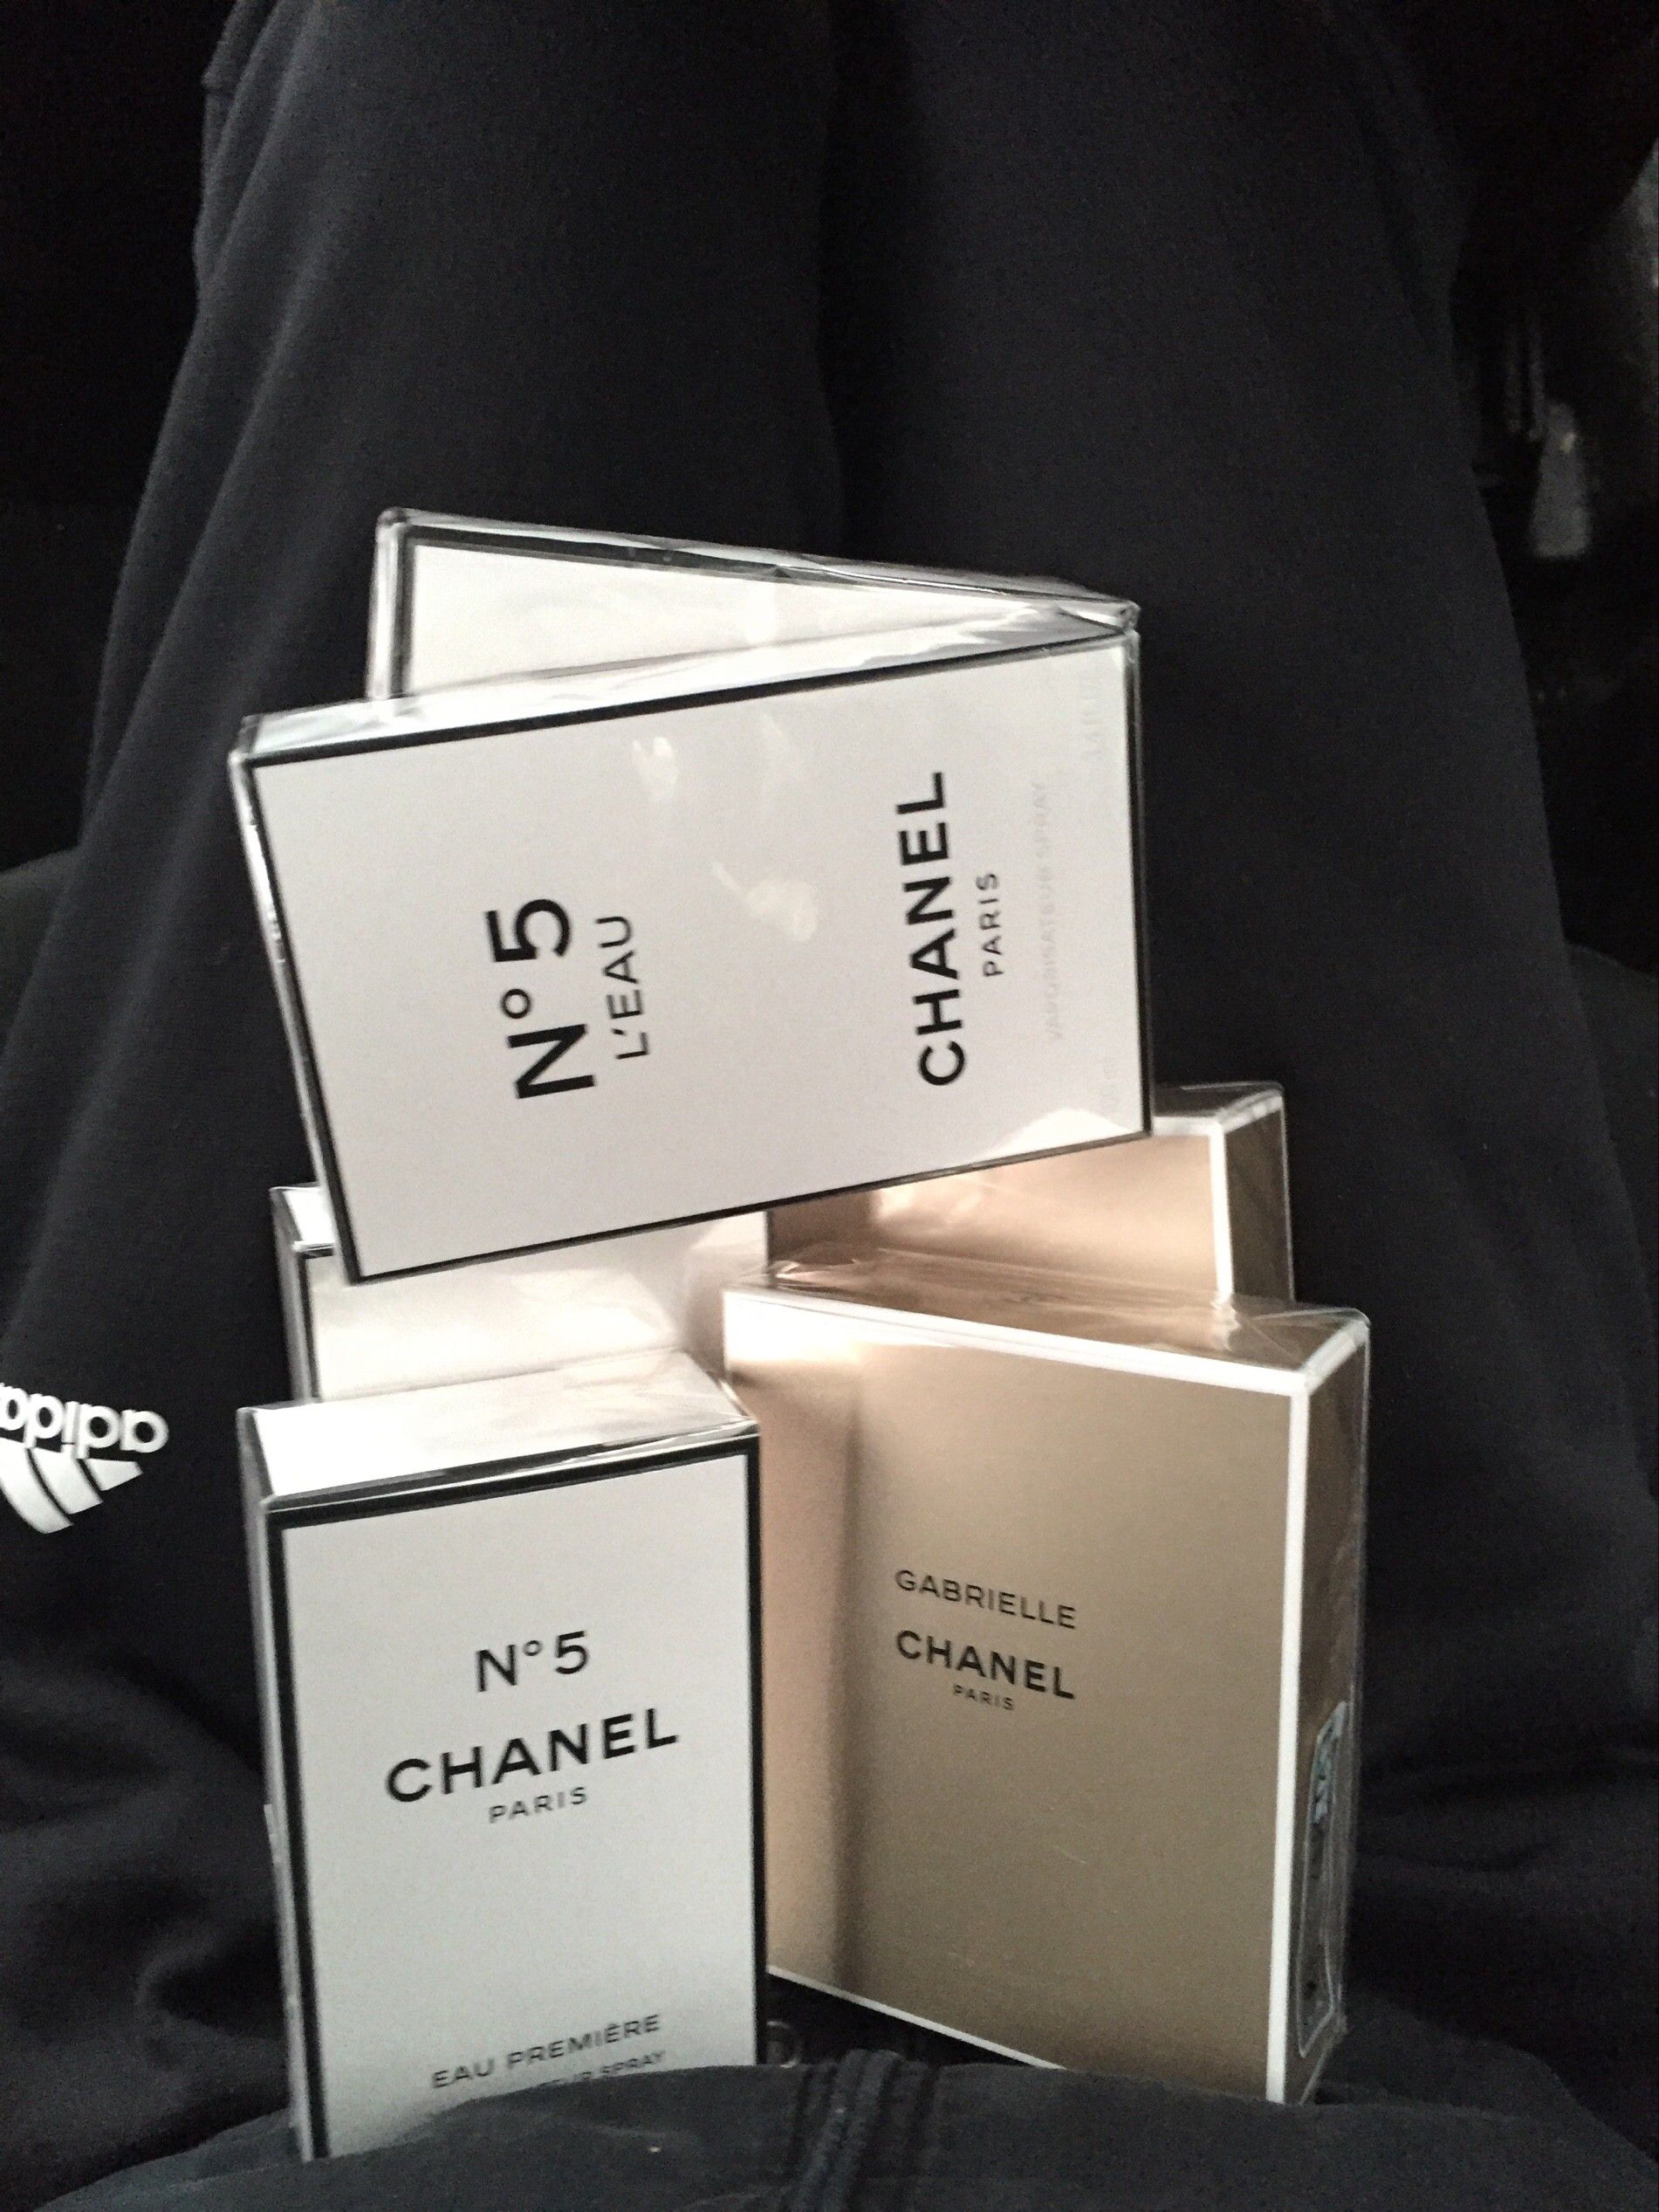 Brand new chanel perfume. Call for prices Gabrielle is gone